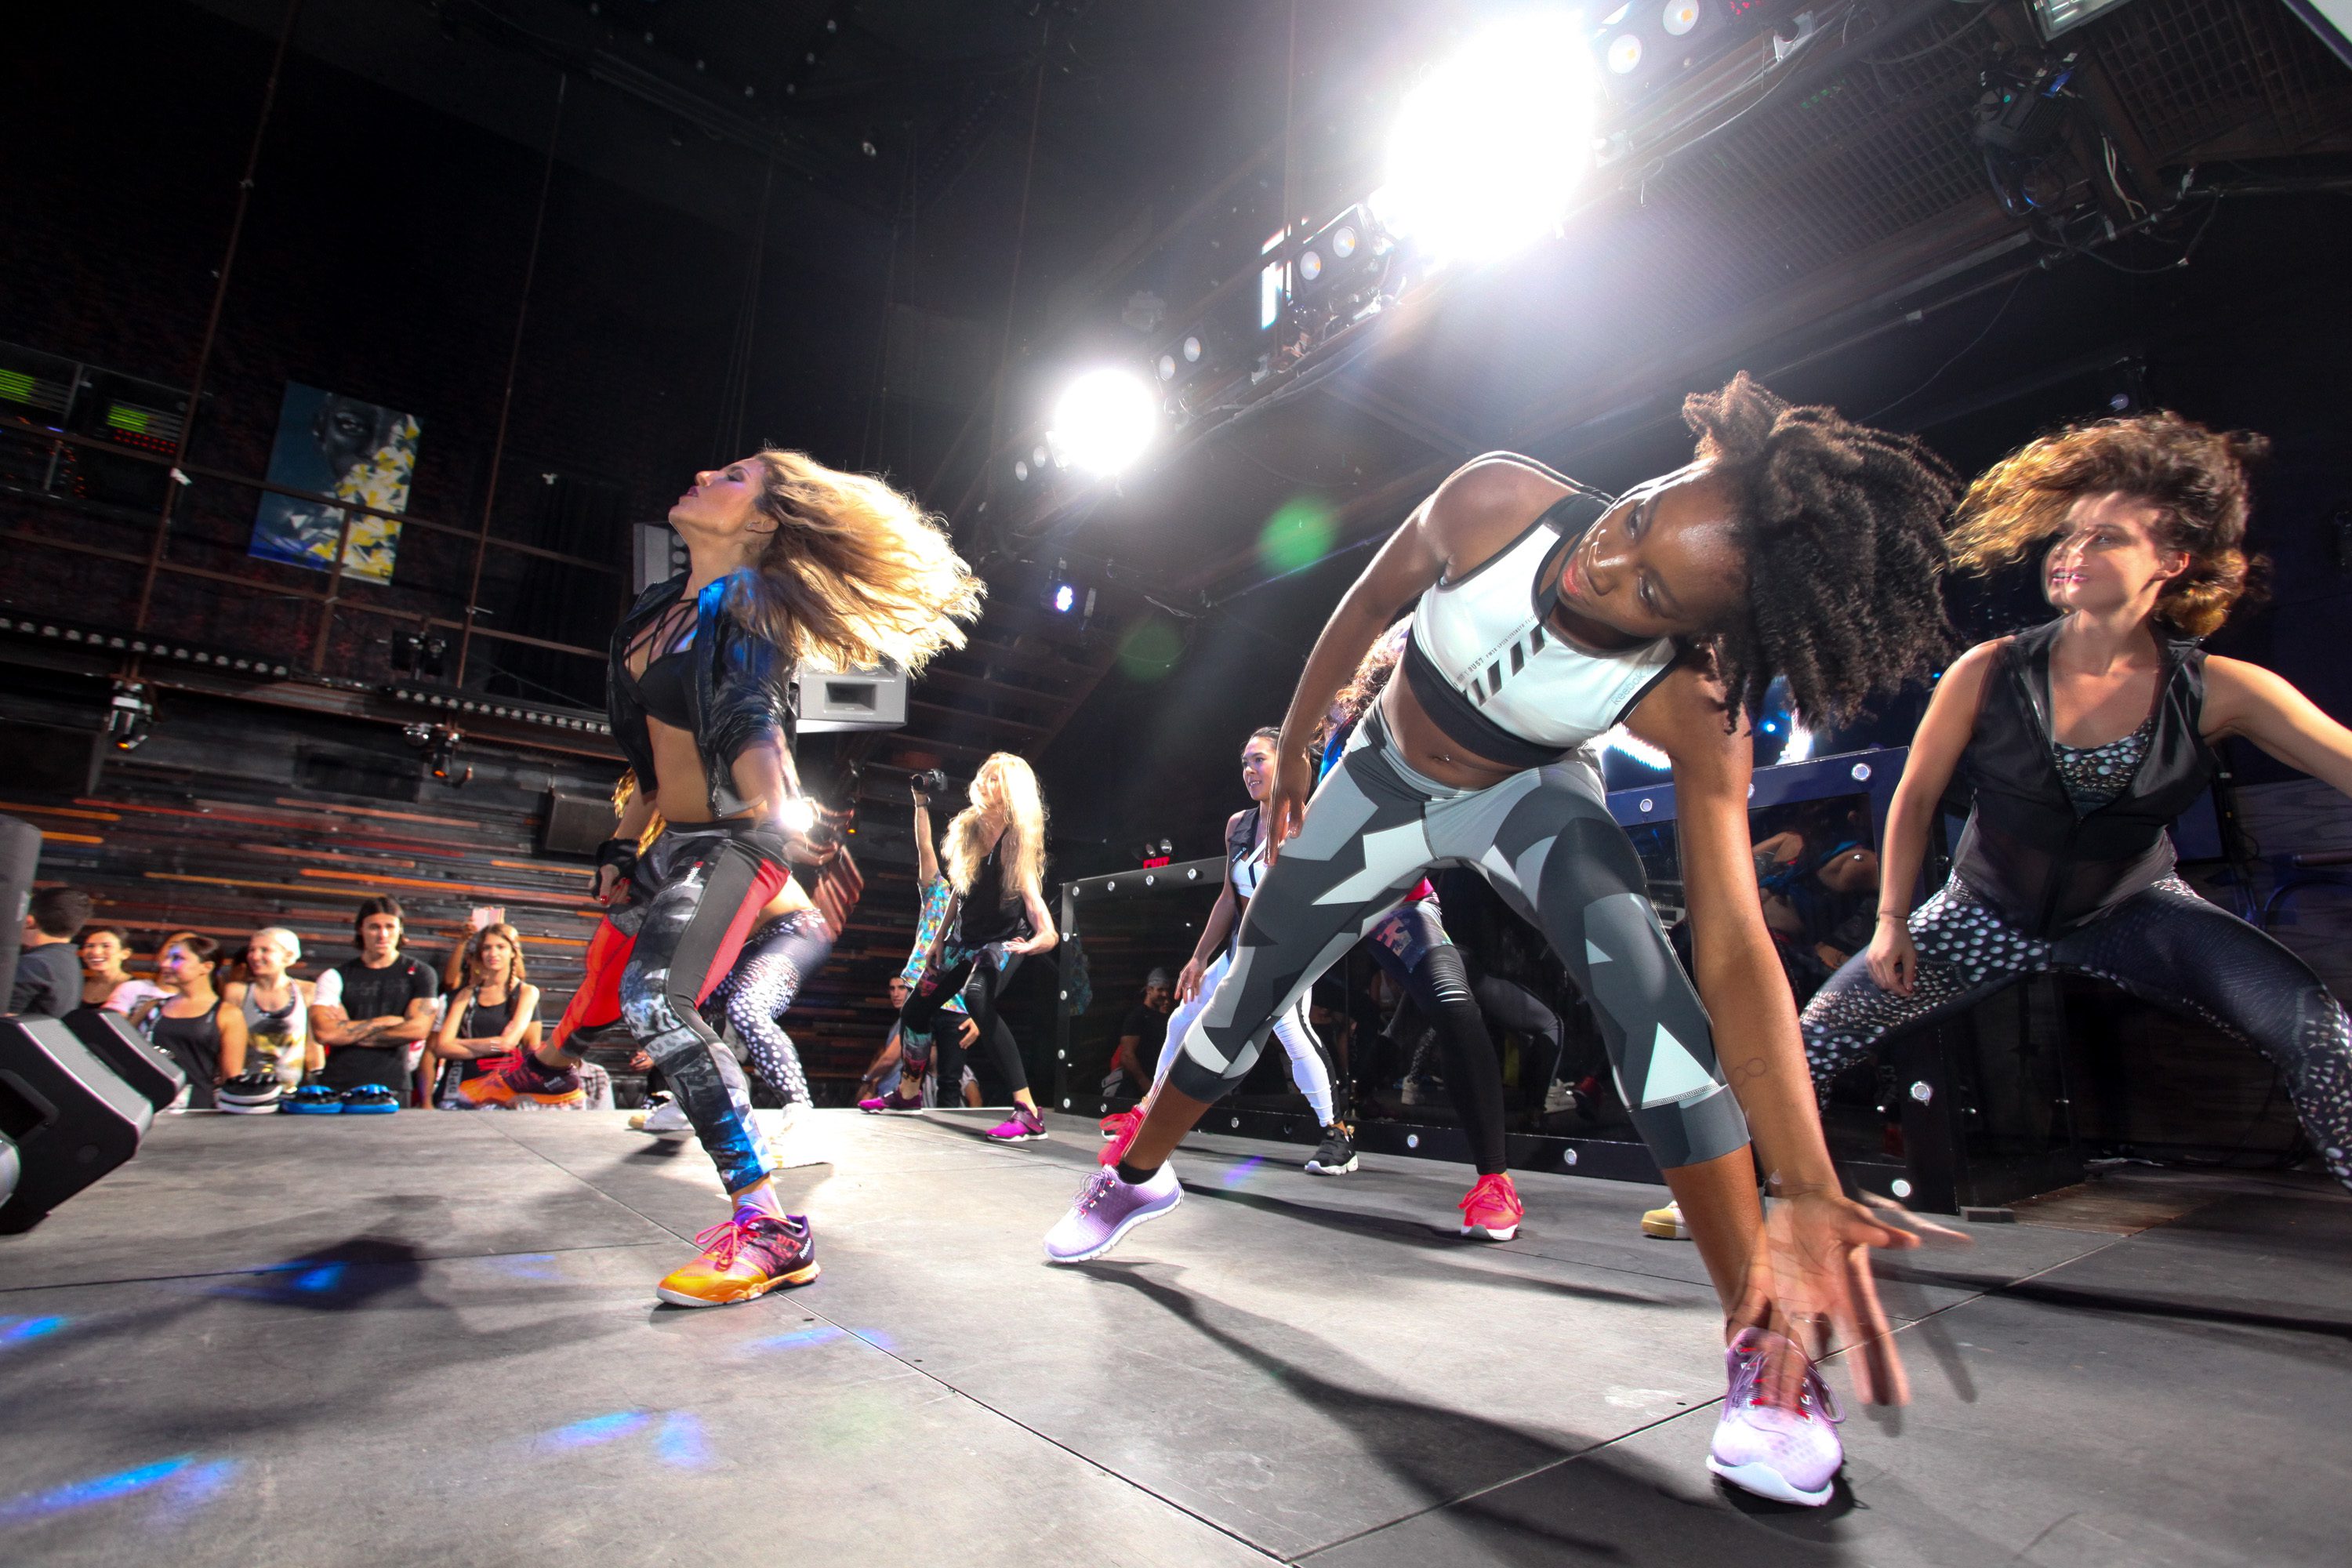 NEW YORK, NY - SEPTEMBER 16: AKT in Motion Class at Marquee on September 16, 2015 in New York City. (Photo by Donald Bowers/Getty Images for Reebok)